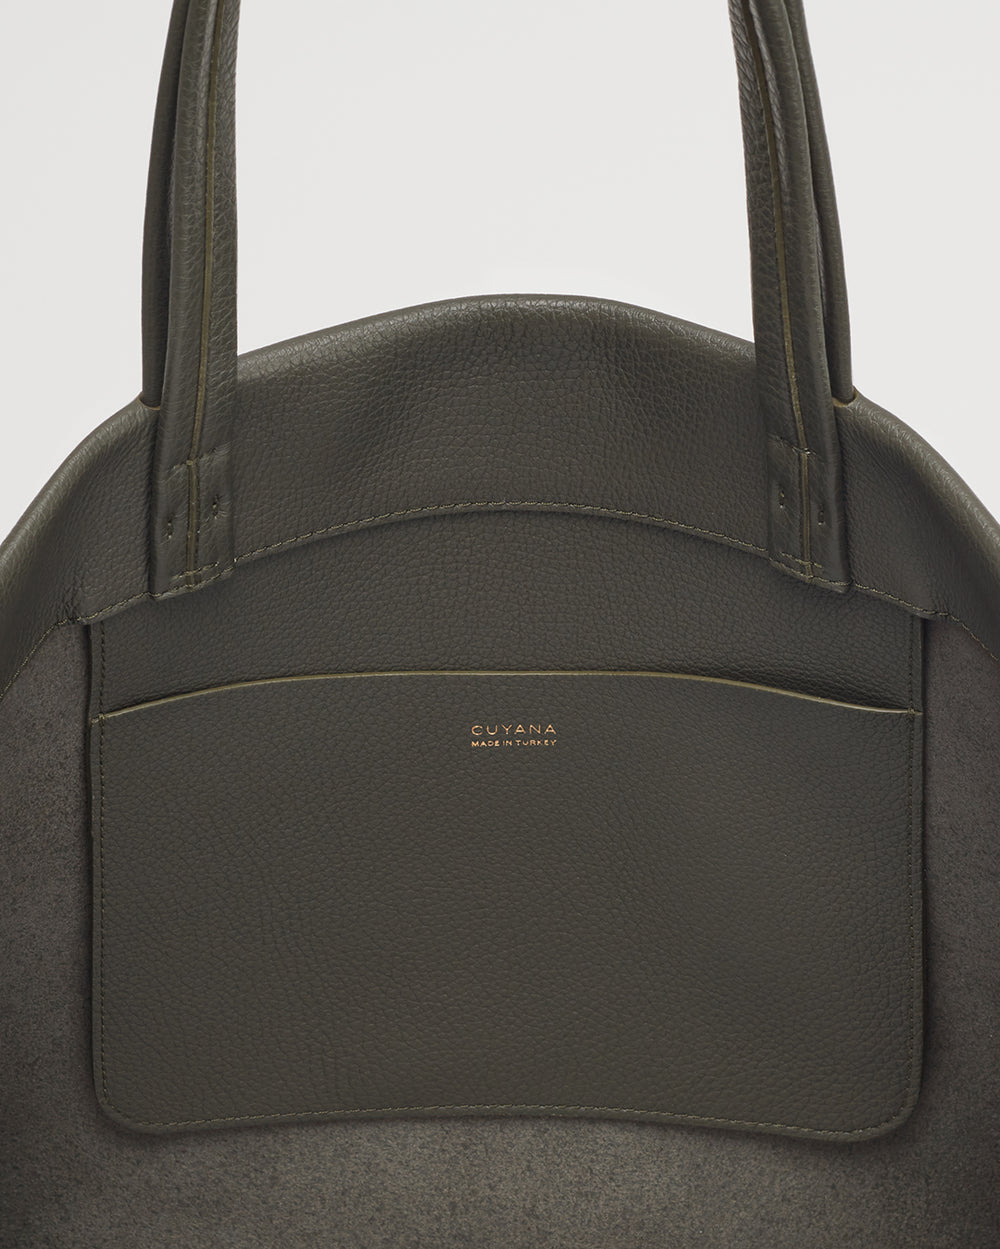 Handbag with two straps and a front pocket, displaying a brand logo.